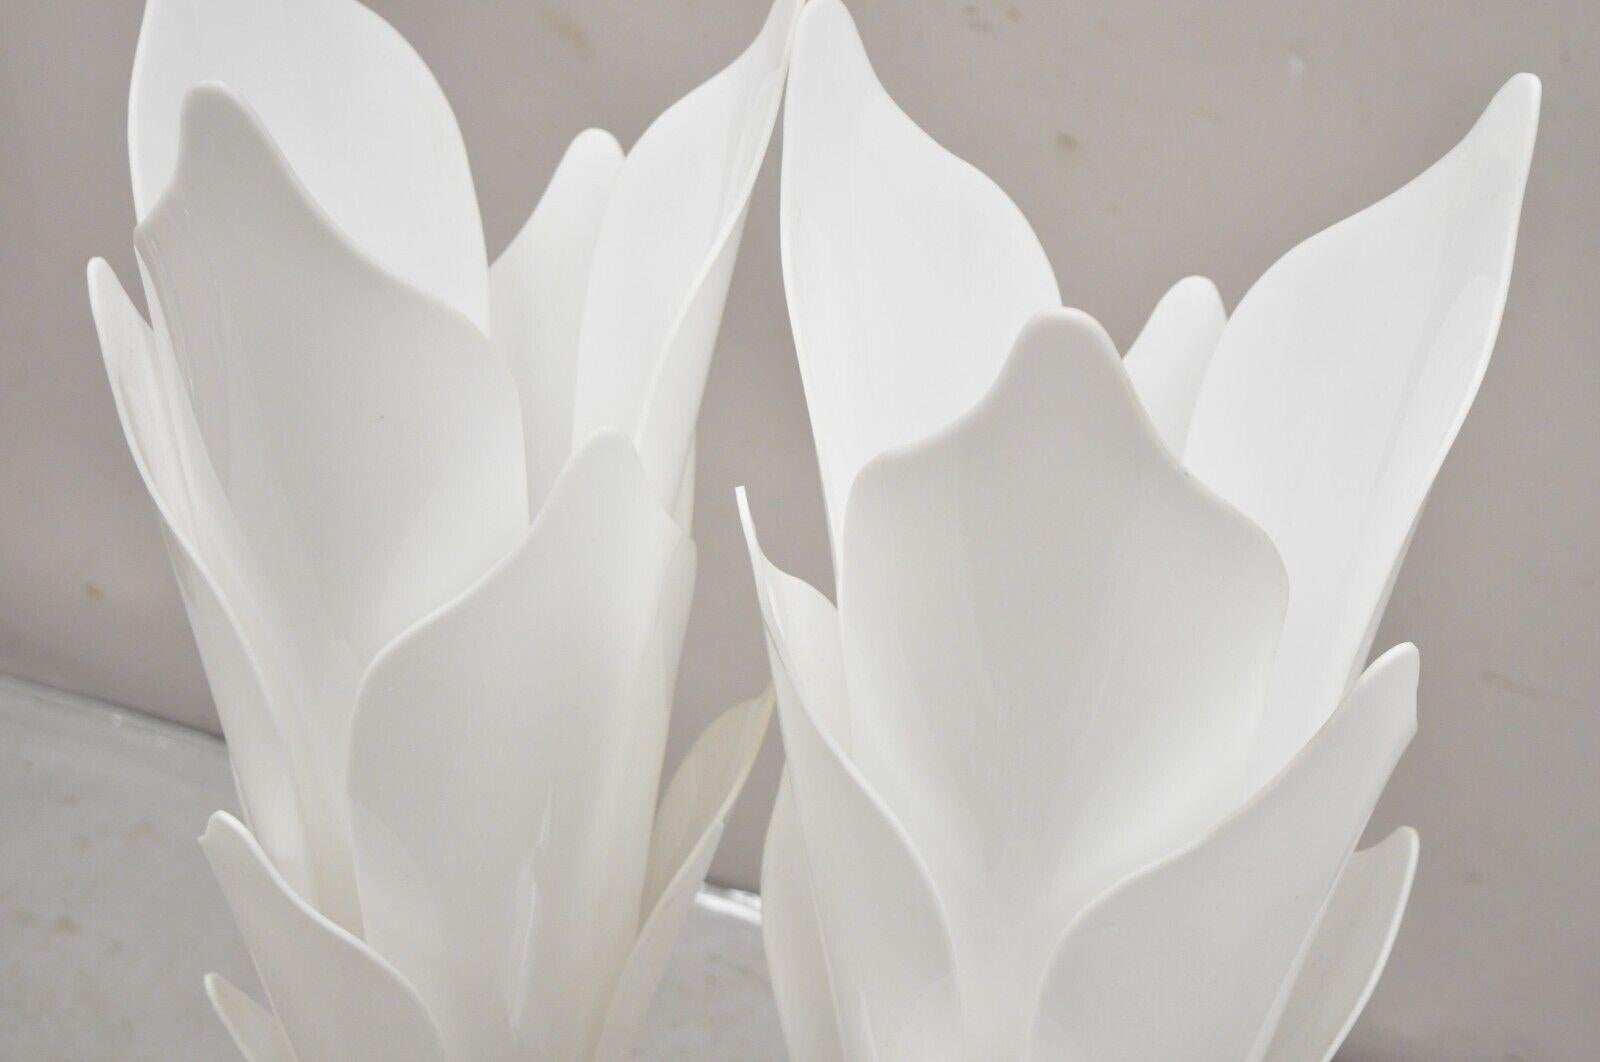 Late 20th Century Rougier White Acrylic Lucite Tulip Flower Leaf Mid Century Table Lamps - a Pair For Sale